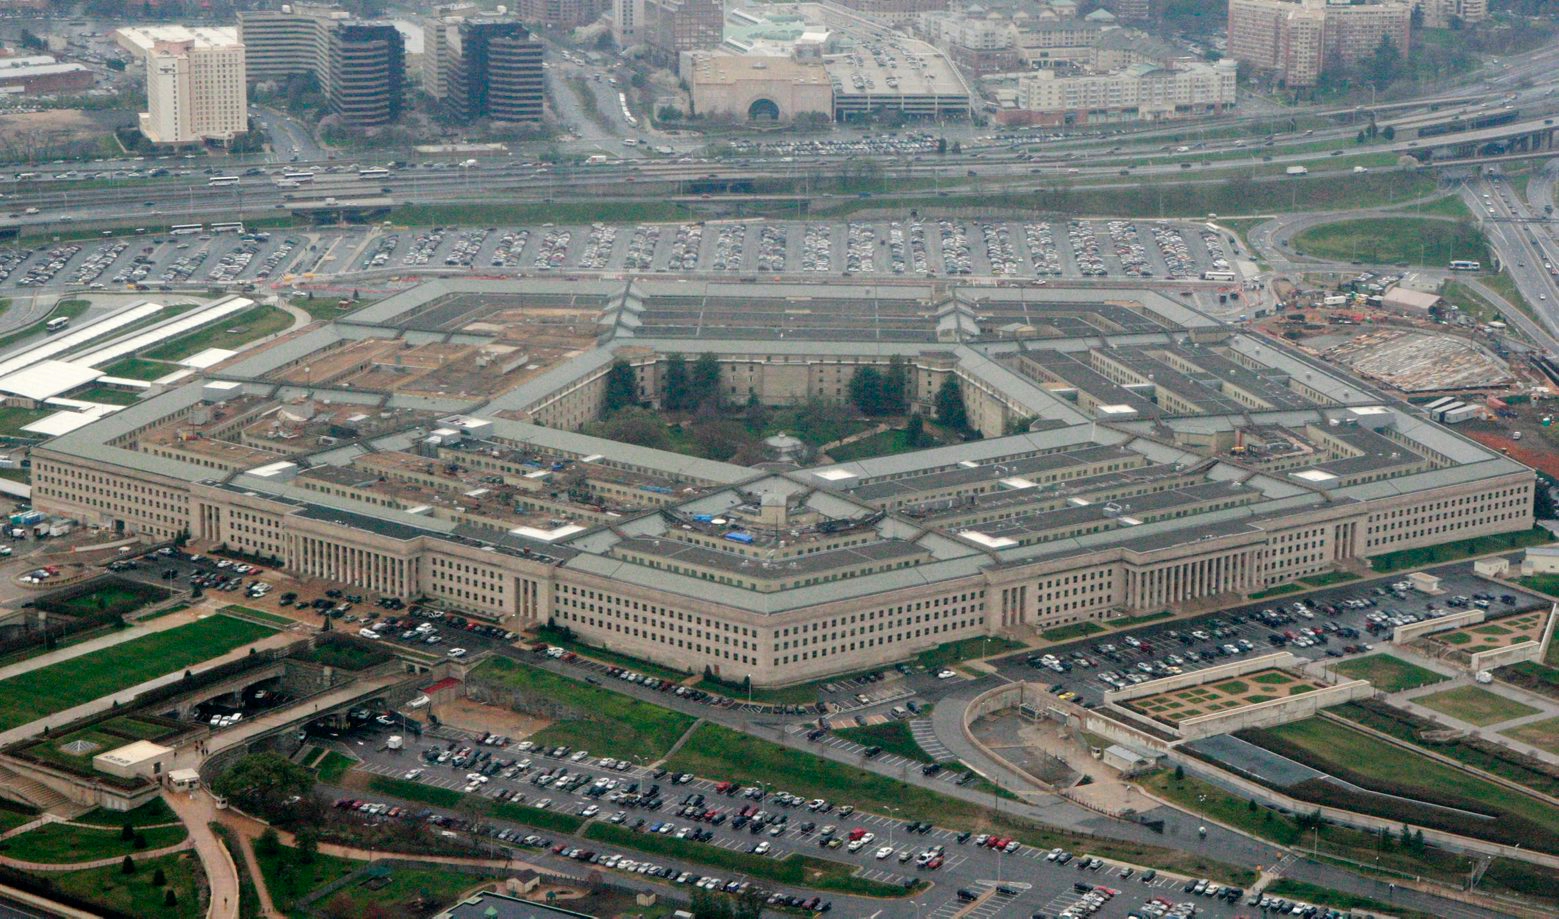 FILE - This March 27, 2008, aerial file photo shows the Pentagon in Washington. The U.S. is protesting an intercept of a U.S. reconnaissance plane by a Russian fighter jet last week, calling it "unsafe and unprofessional" amid what it views as increasingly aggressive air operations by Moscow. Pentagon spokesman Mark Wright on Sunday, April 12, 2015, said the U.S. was filing a complaint to Russia after the April 7 incident over the Baltic Sea. (AP Photo/Charles Dharapak, File) United States Russia Intercept